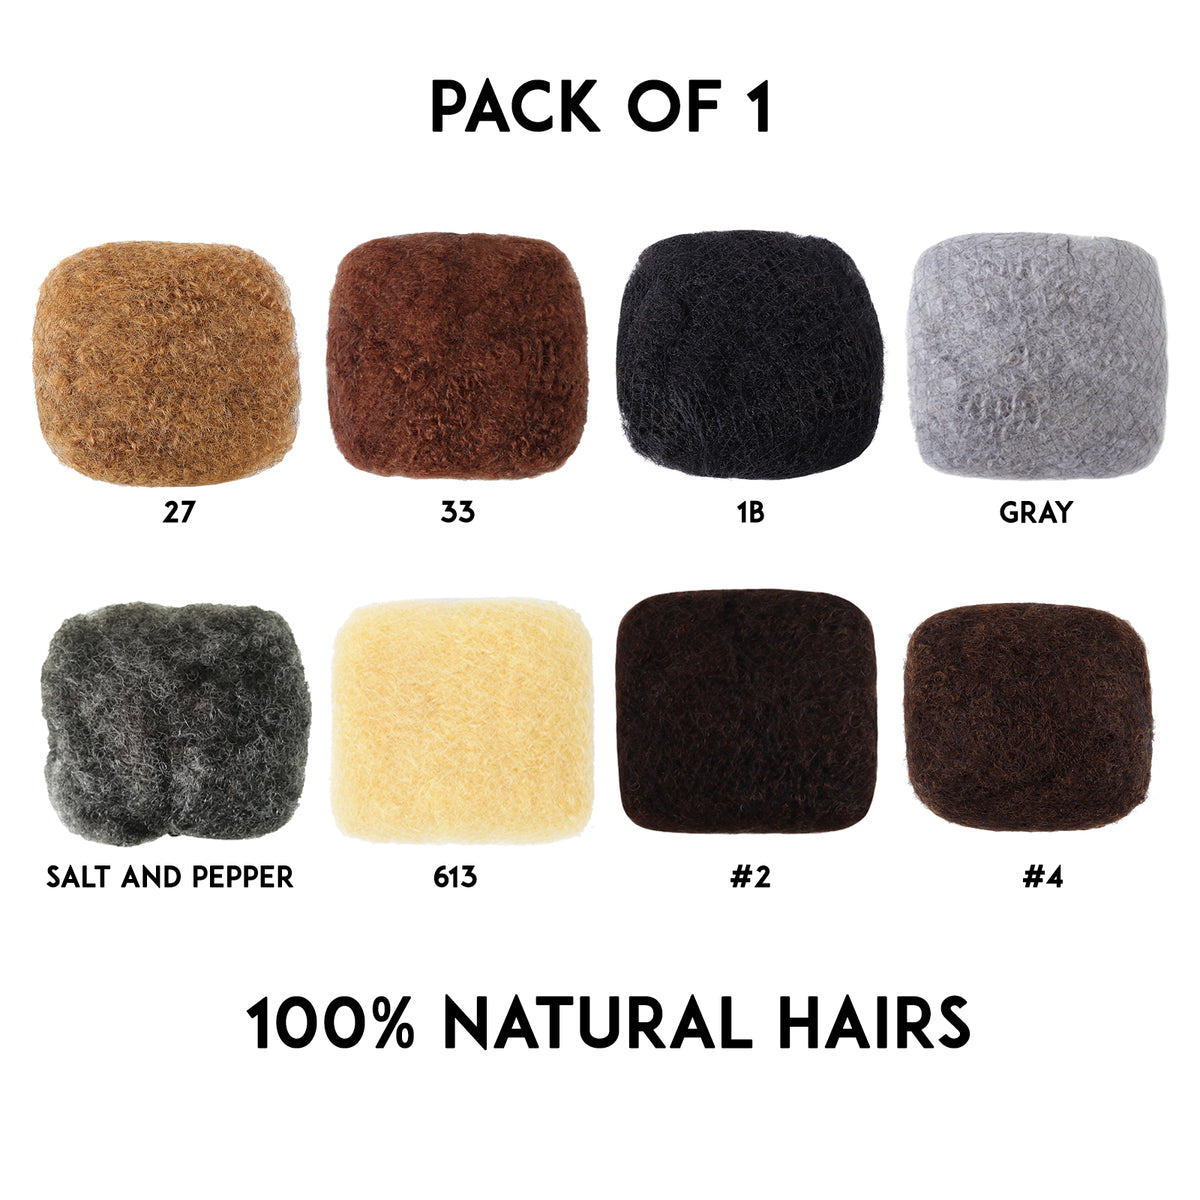 Afro Kinky Human Hairs For Making,Repairing & Bulking Locs 10 Inch Long Afro Kinky Bulk Human Hair For Dreadlock Extensions 100% Natural Afro Hairs For Twisting & Braiding 29g/1Oz (27/ Honey Blonde, 10 inch)